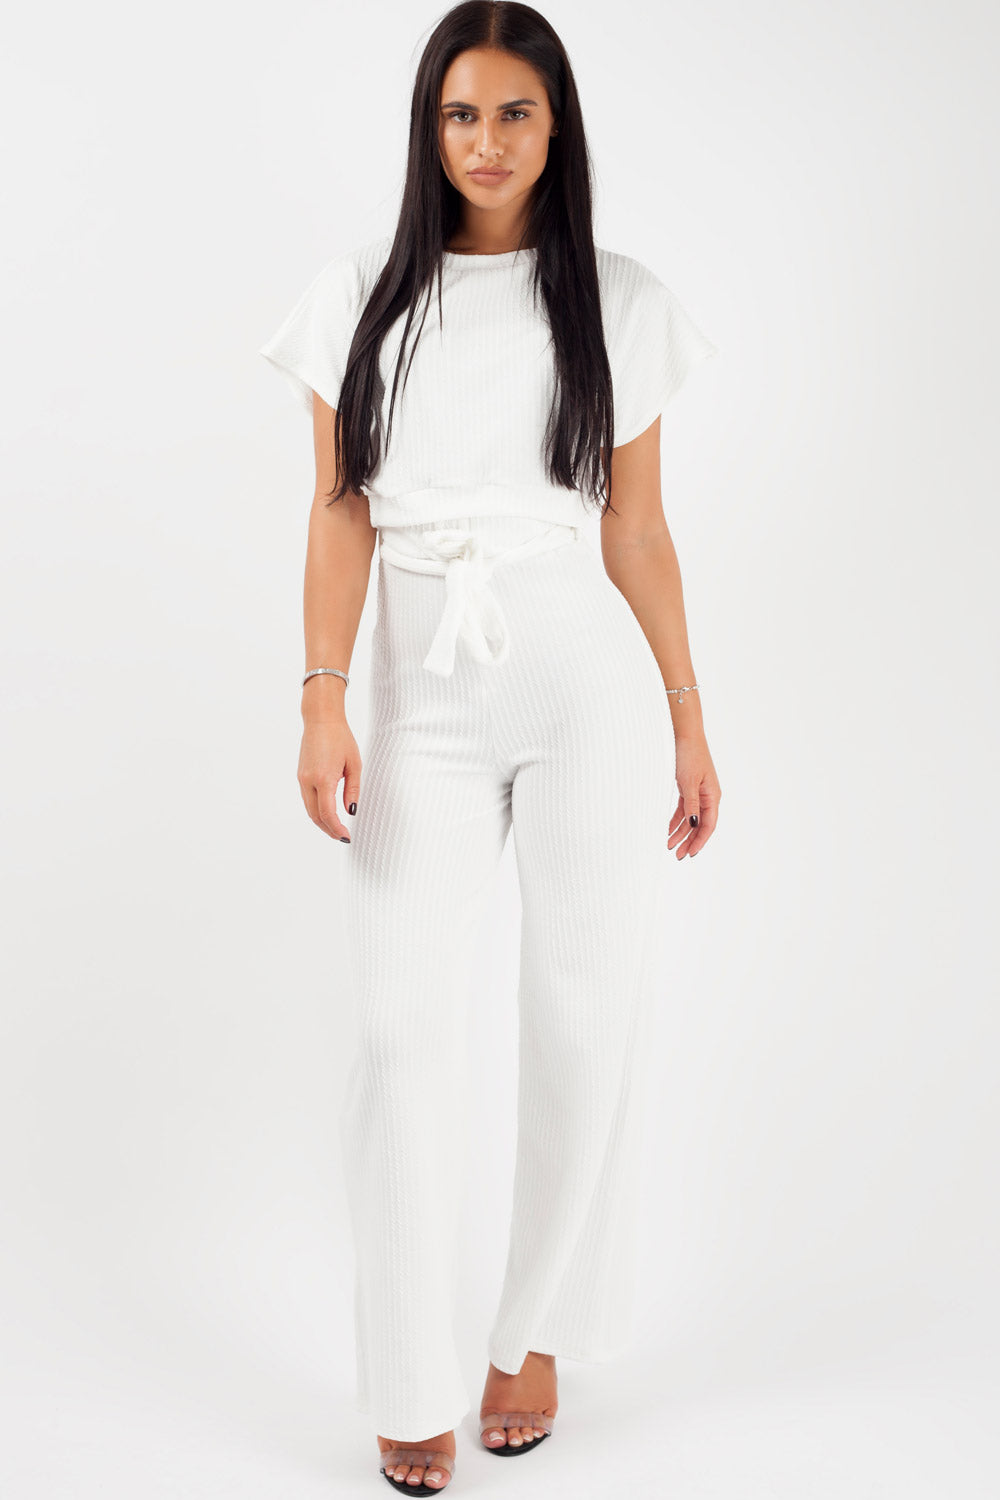 wide leg trousers and crop top loungewear co ord set 